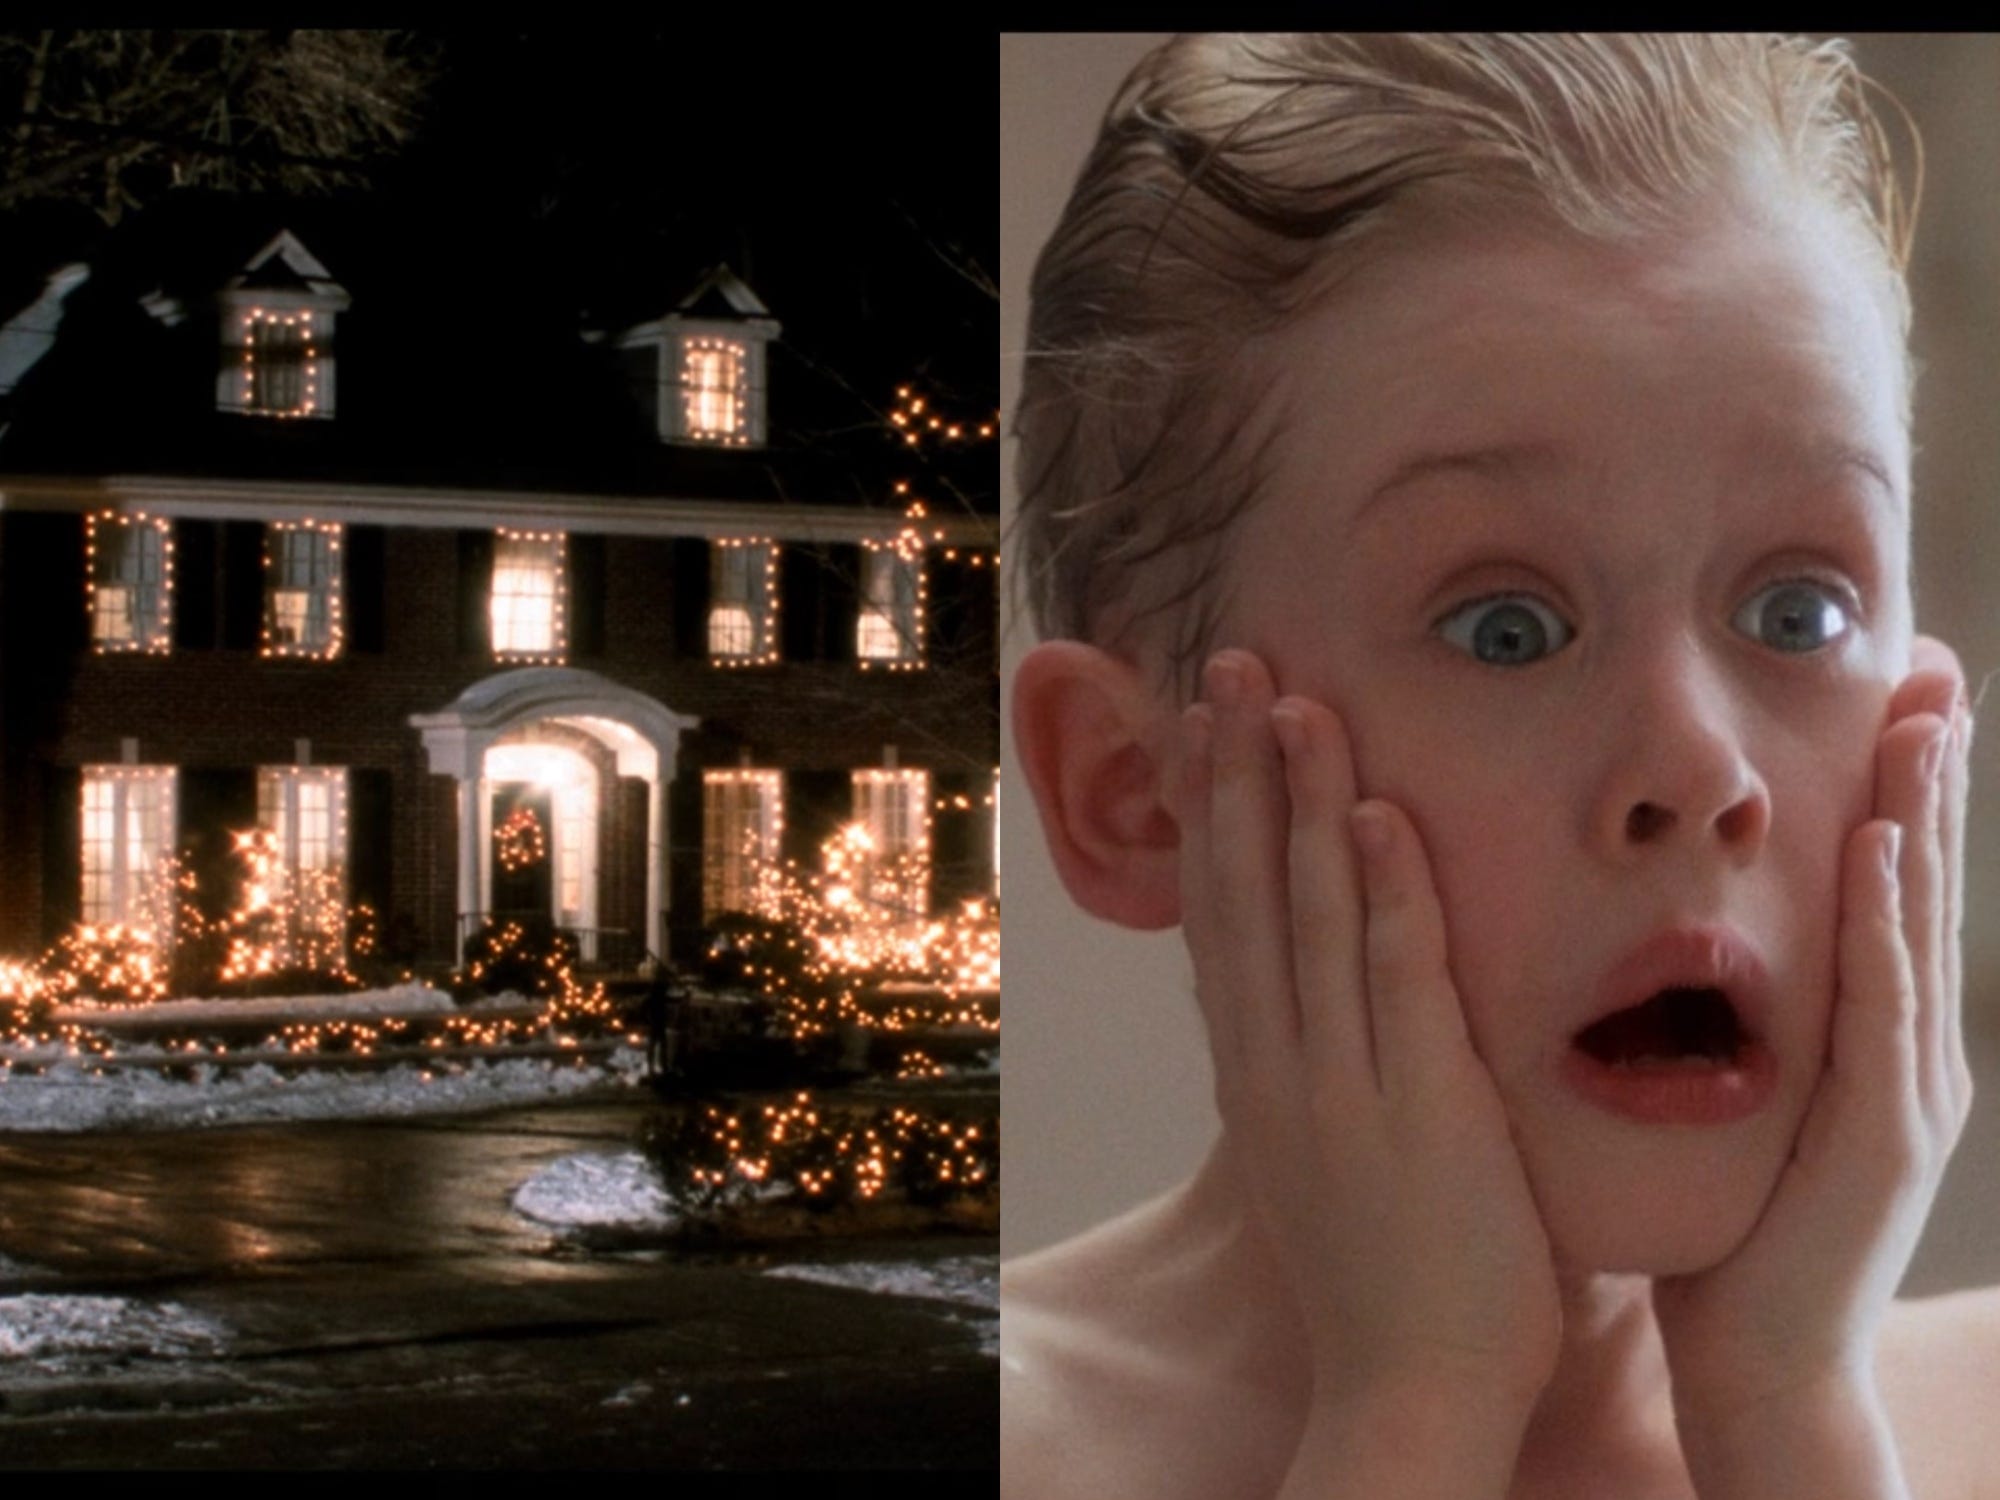 The home was the main filming location for the classic holiday film